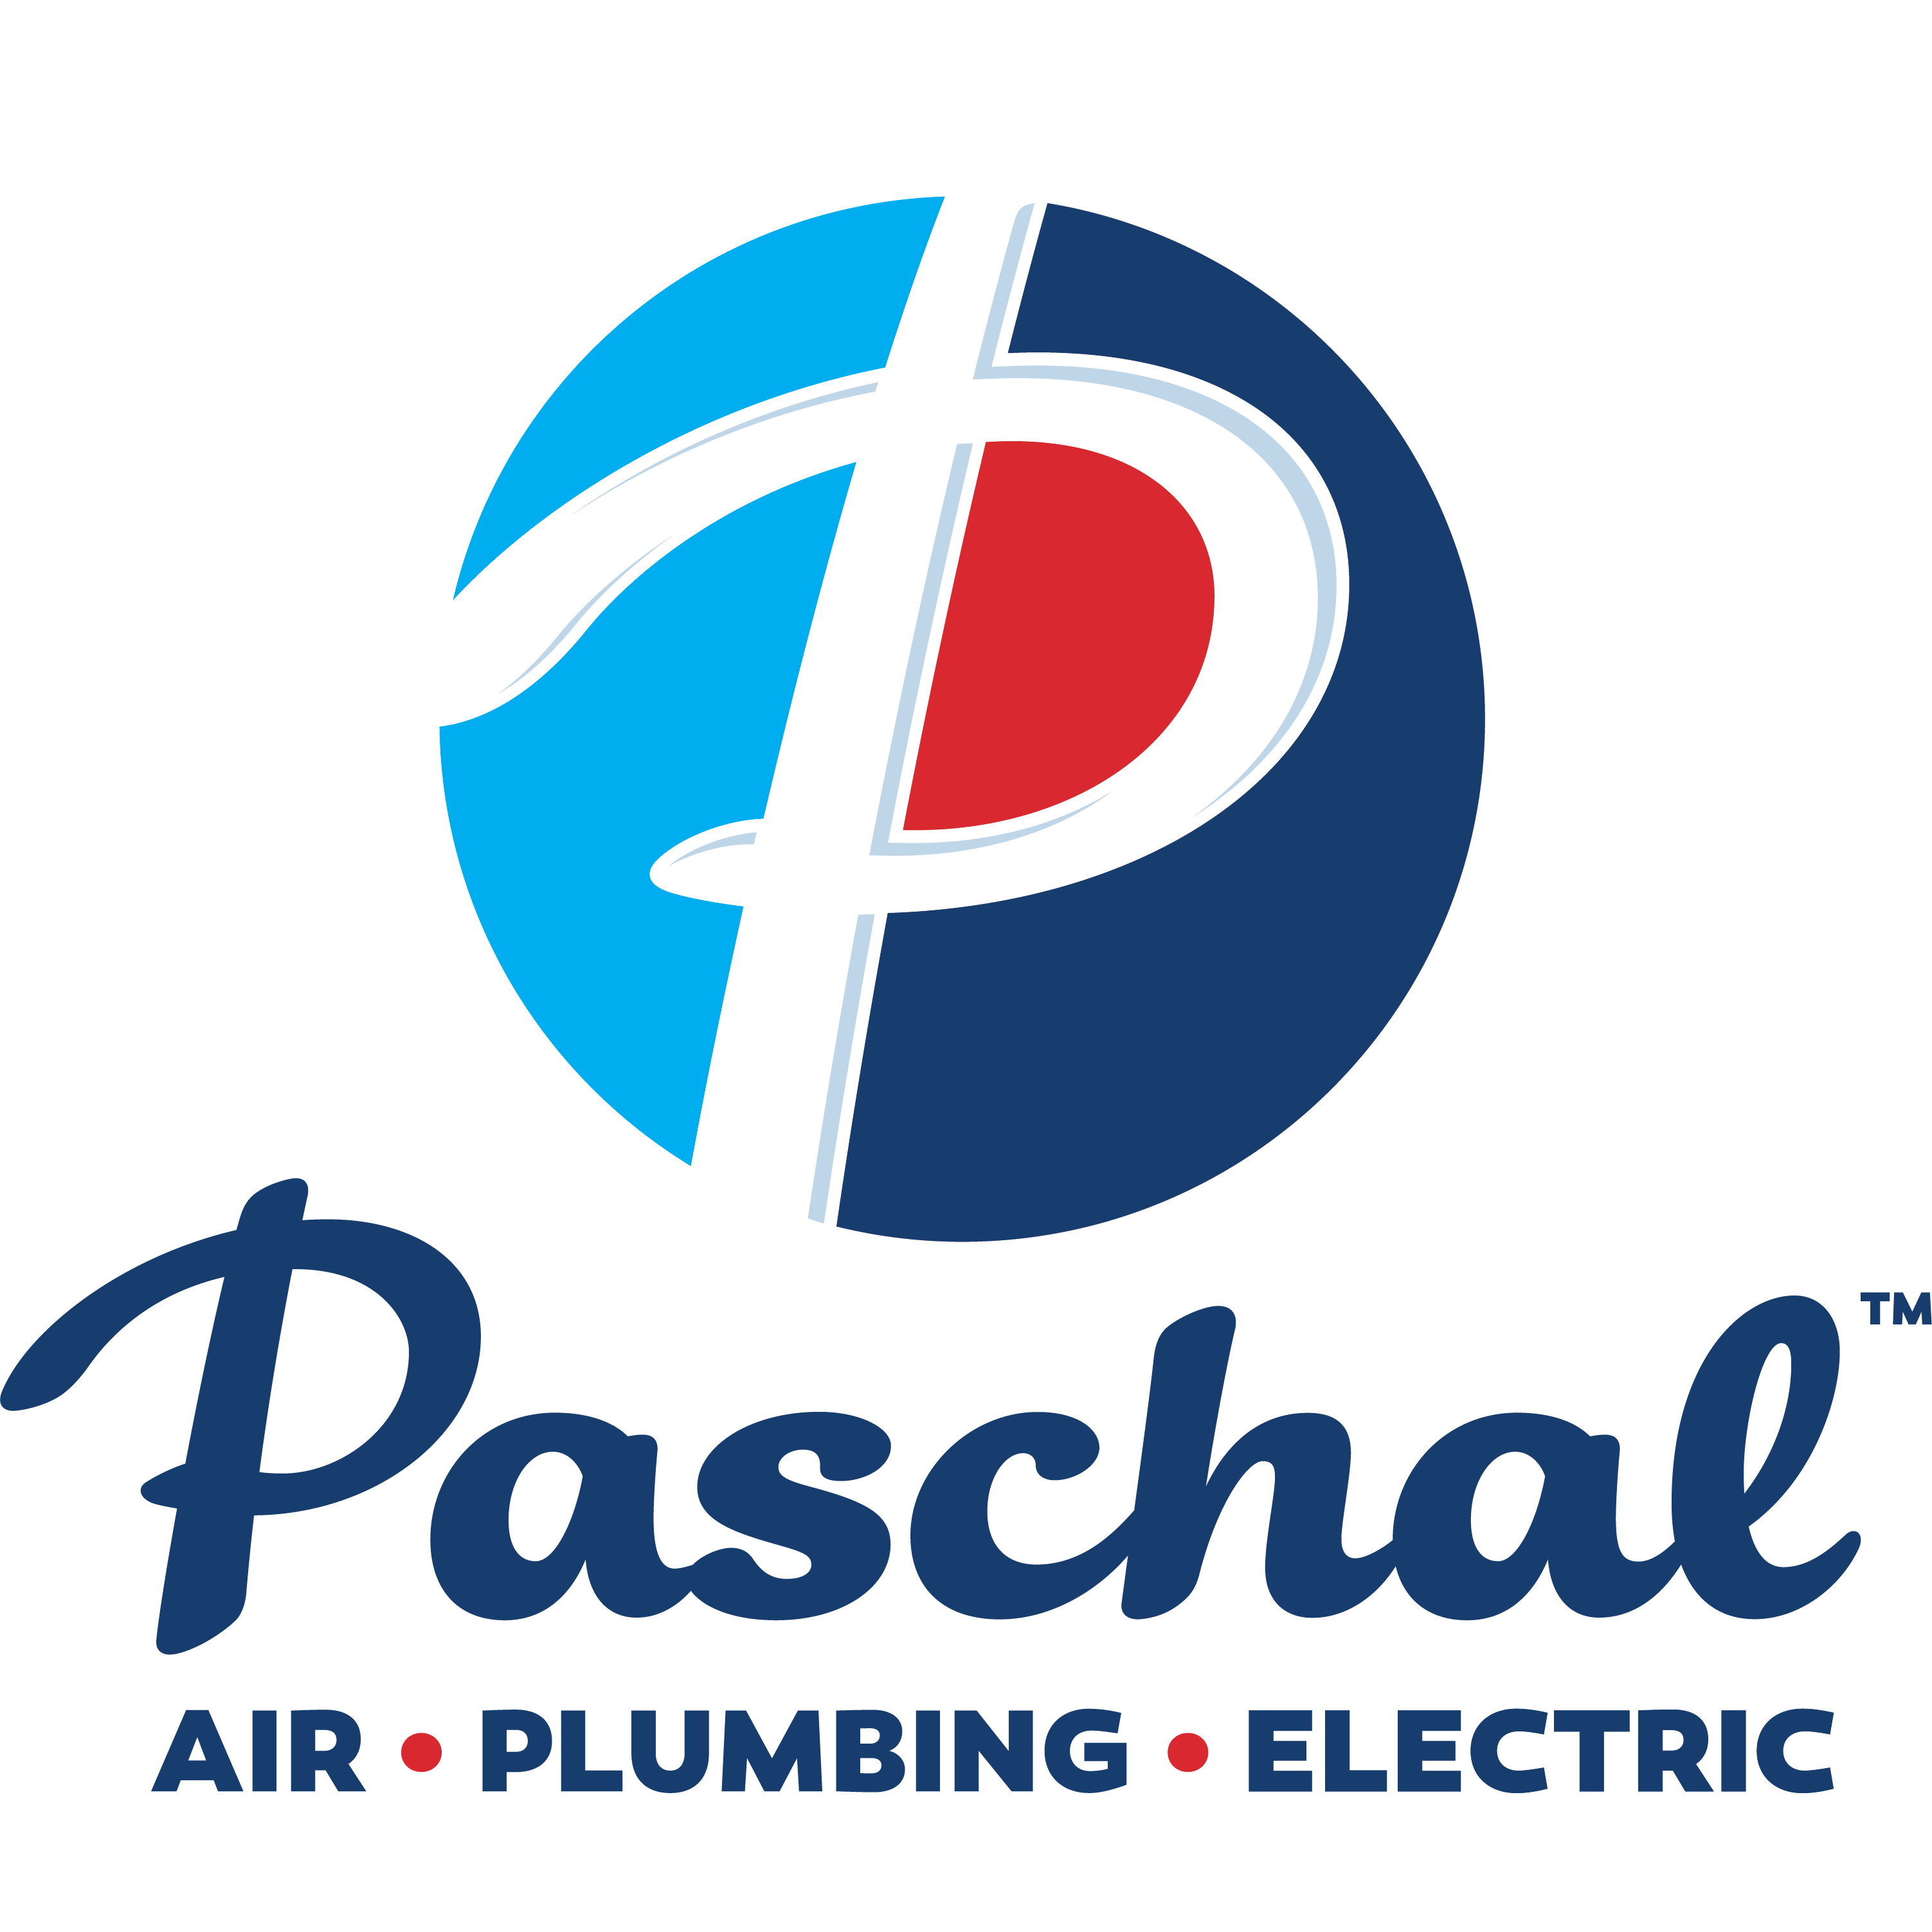 Paschal Air, Plumbing & Electric - Searcy, AR 72143 - (501)279-0661 | ShowMeLocal.com